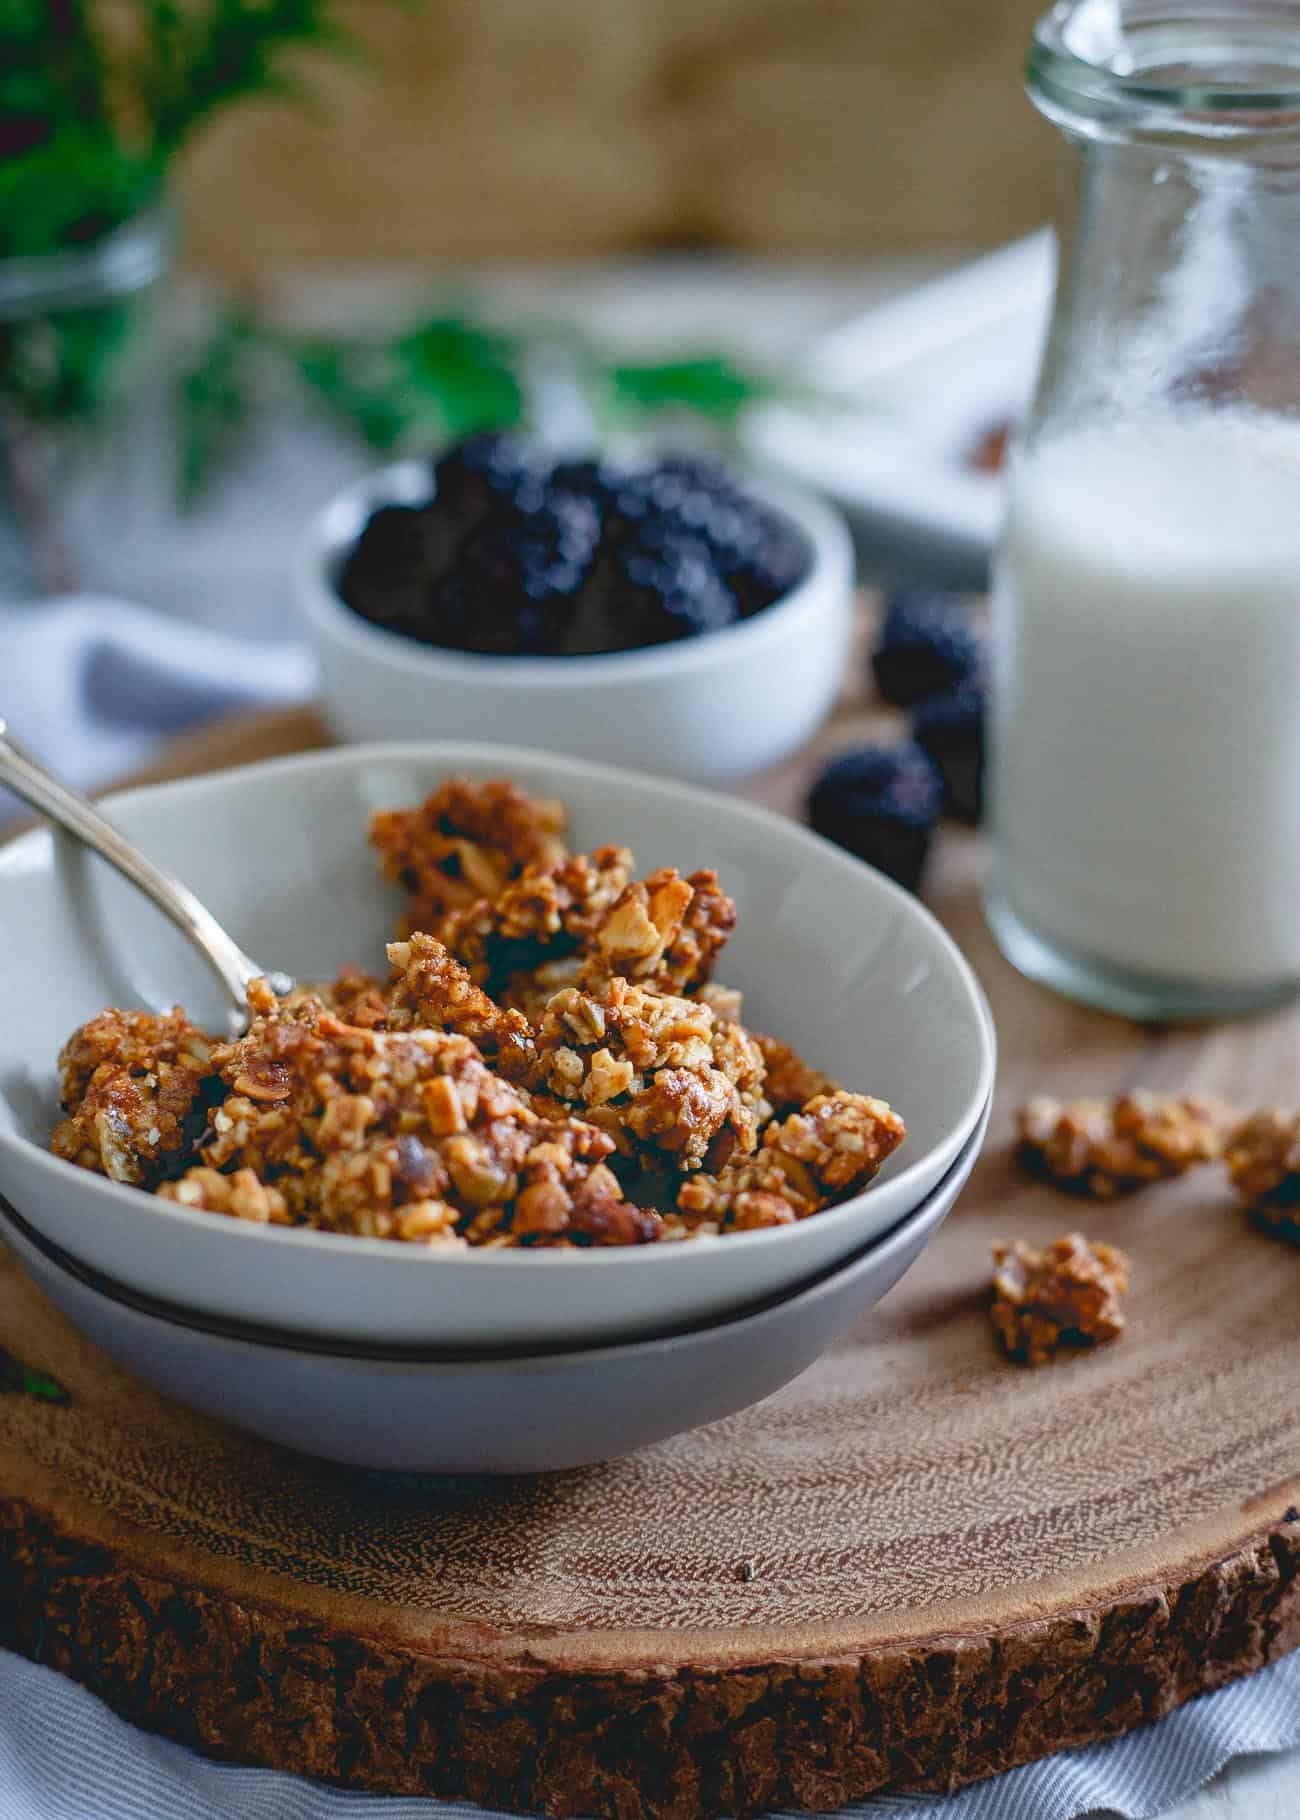 This paleo gingerbread granola is made with all the good stuff, just nuts, seeds and natural sweeteners with a wintertime twist perfect for the holidays.